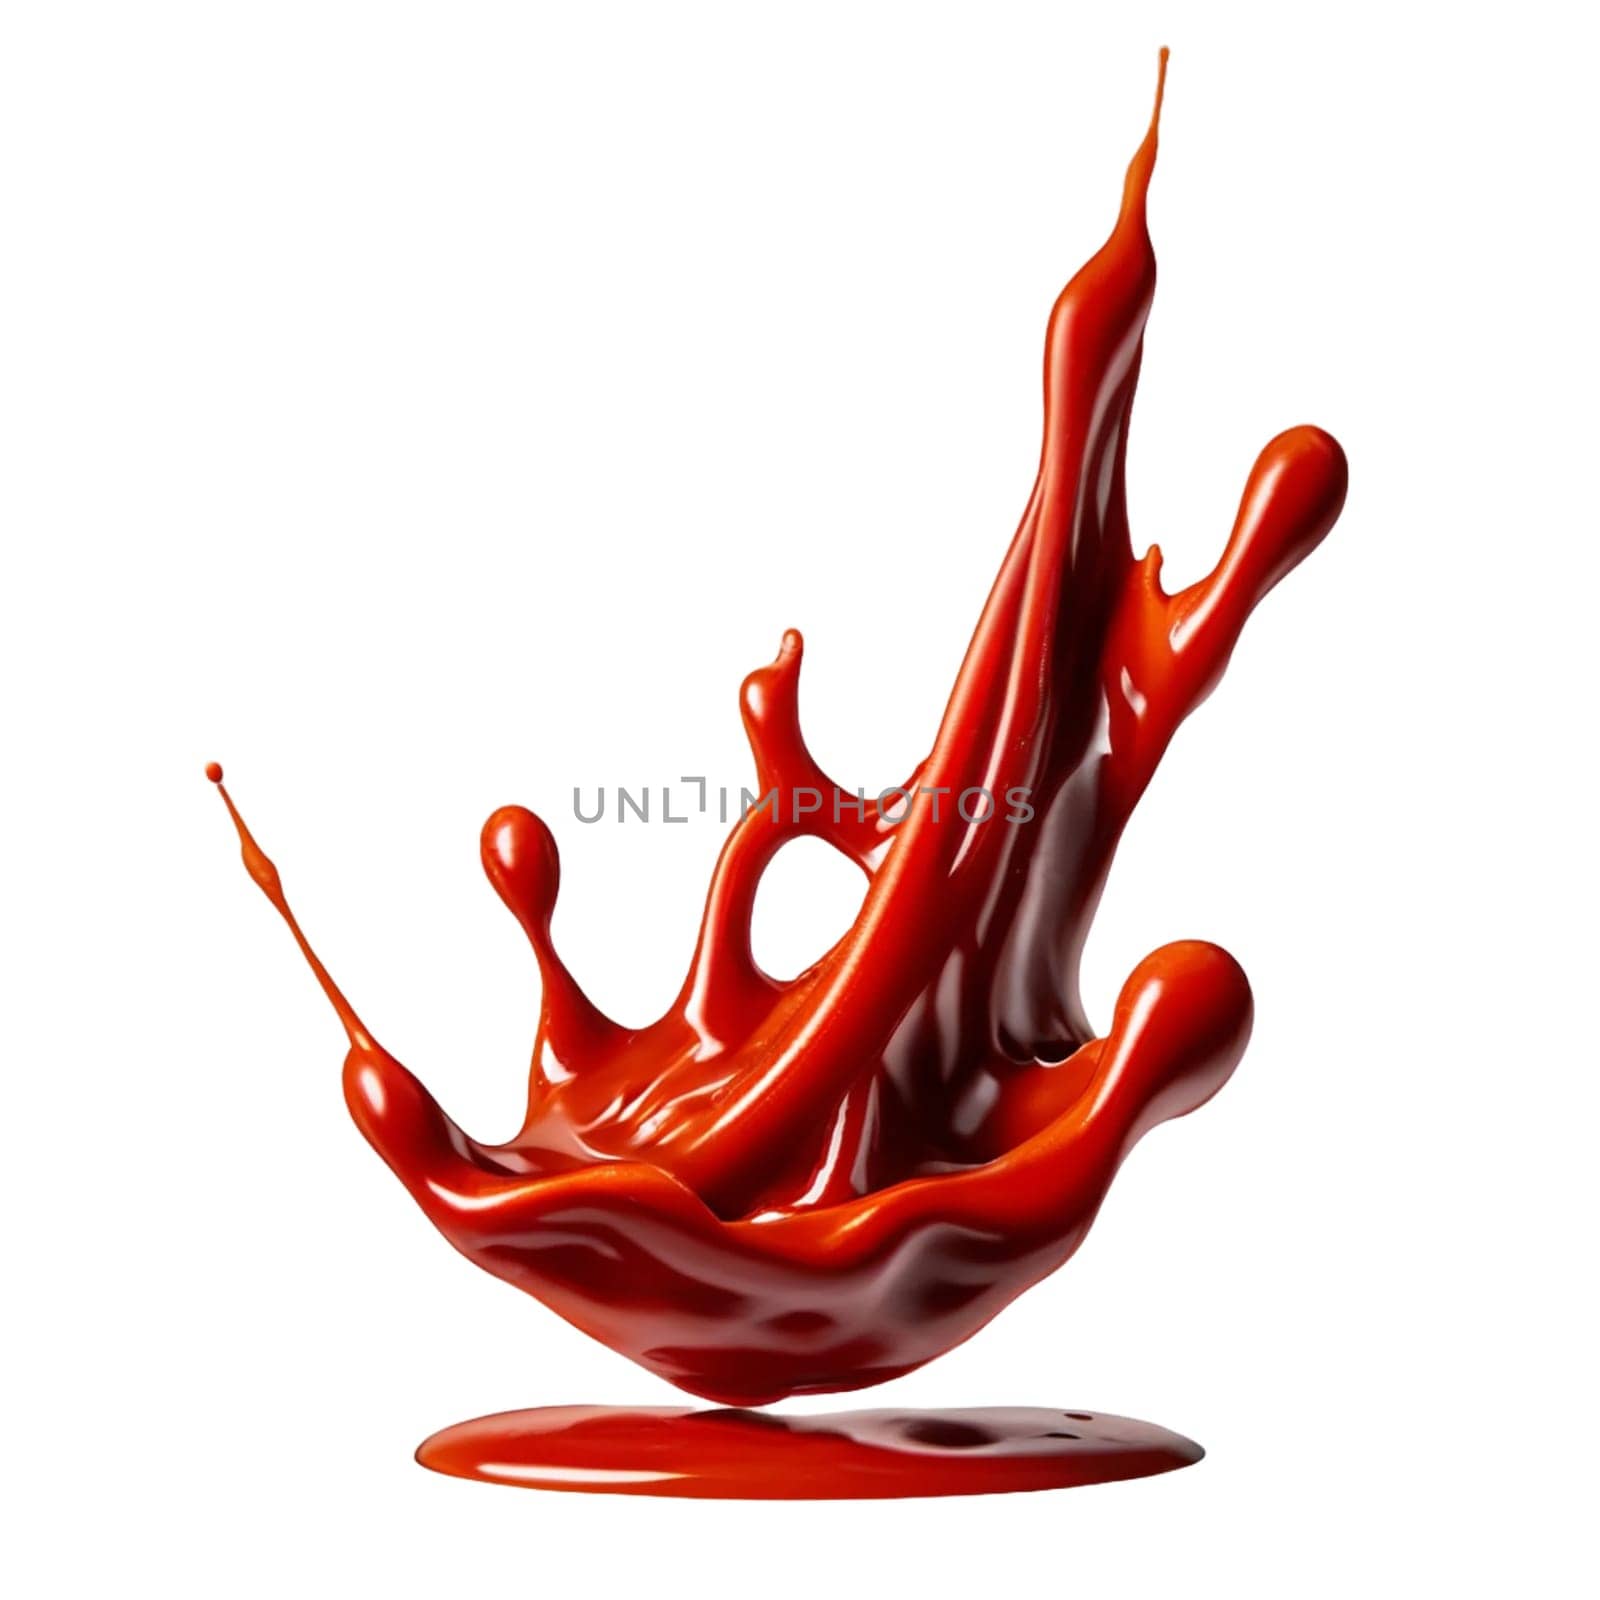 A splash of red thick liquid. 3d illustration, 3d rendering. png image. Red ketchup splashes isolated on white background, tomato pure texture. High quality image